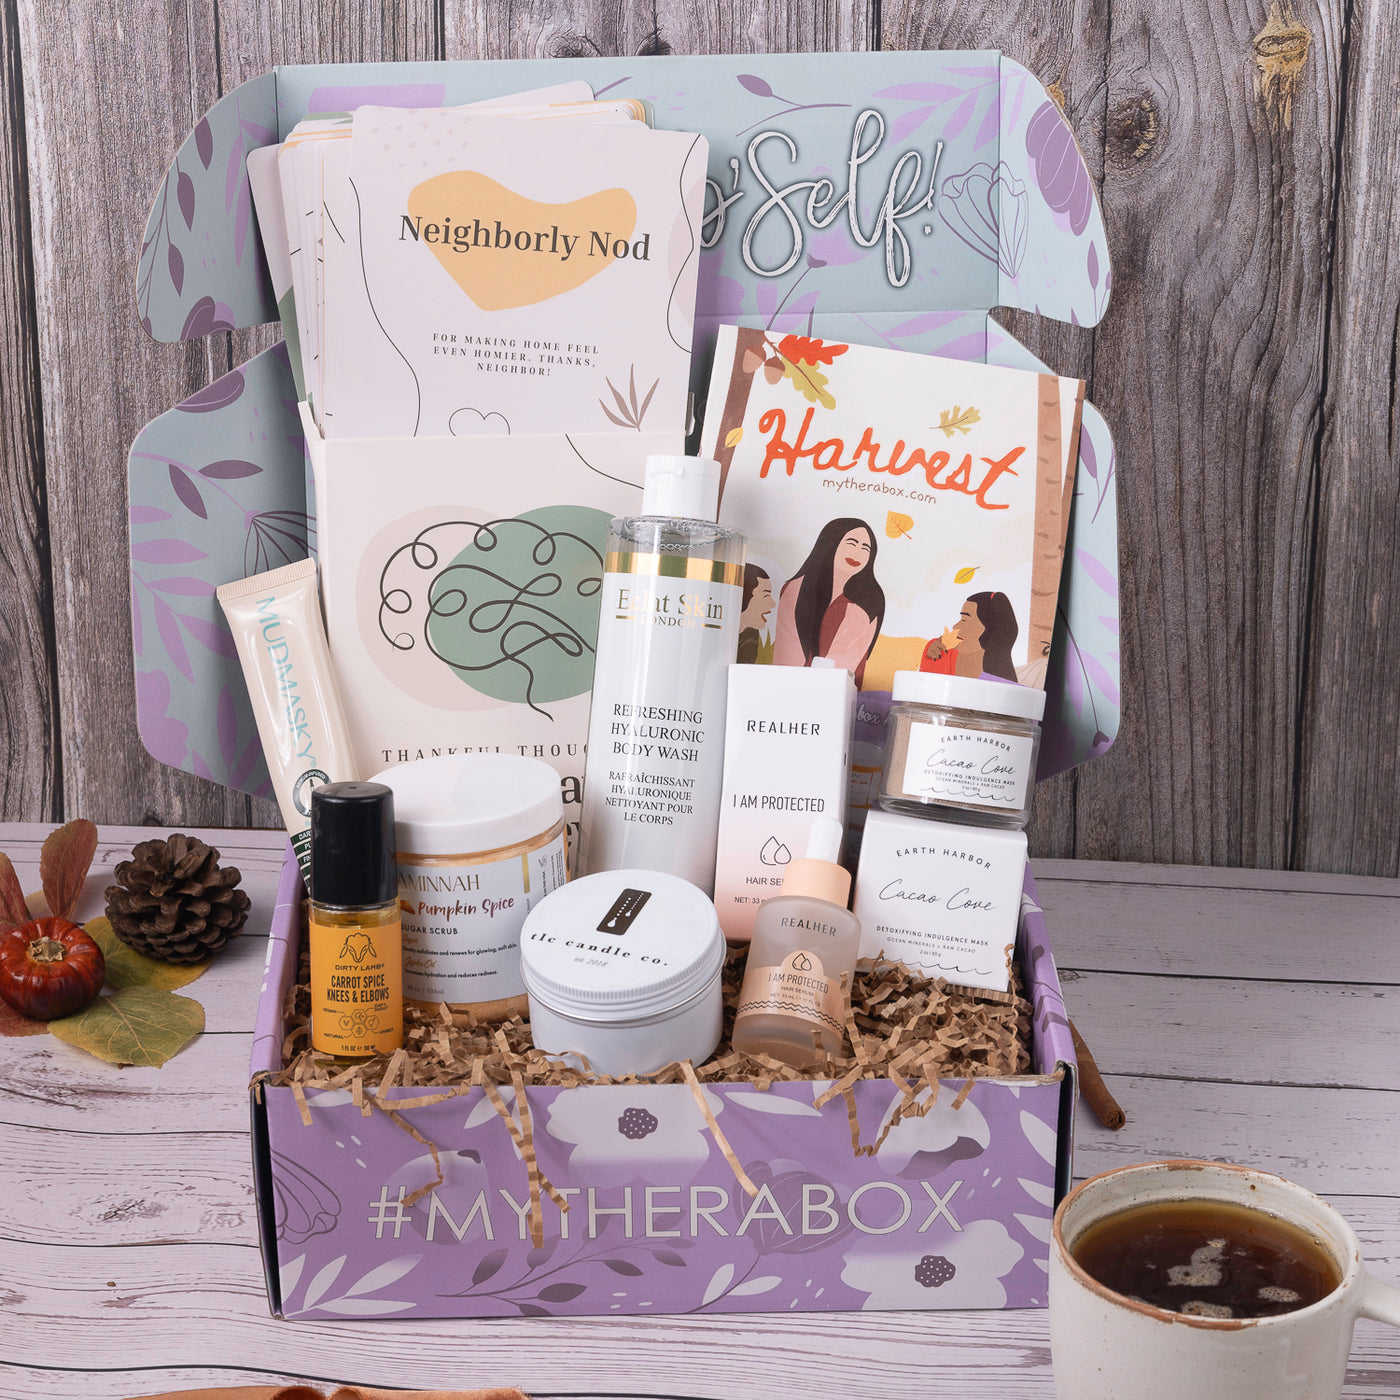 TheraBox Harvest box featuring TLC Candle Co. | Gatherings Candle, Earth Harbor Naturals | Cacao Cove Detoxifying Vitamin C Face Mask, AMINNAH |Pumpkin Spice Sugar Polish, REALHER |I Am Protected Hair Serum, MUDMASKY |Serum-Infused Eye Mask, Eclat Skin London | Refreshing Hyaluronic Body Wash,  Dirty Lamb| Carrot Spice Knees & Elbow, AYNIL | Thankful Thoughts: A 30-Day Journey